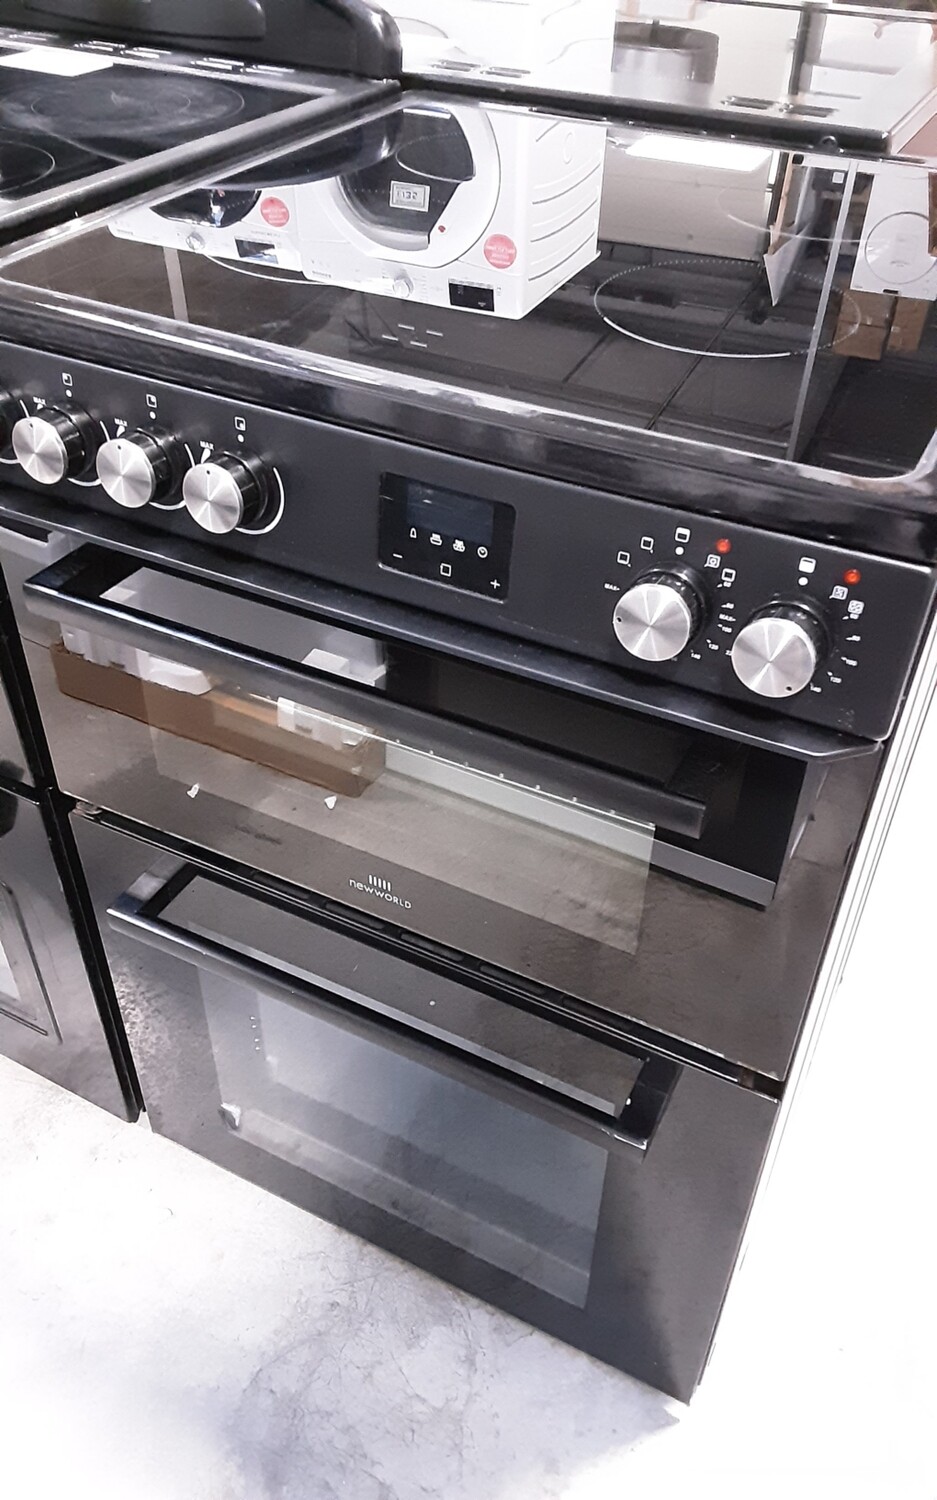 New World 60cm Electric Cooker fan oven with Ceramic Hob - Black - Refurbished 6 Month Guarantee 